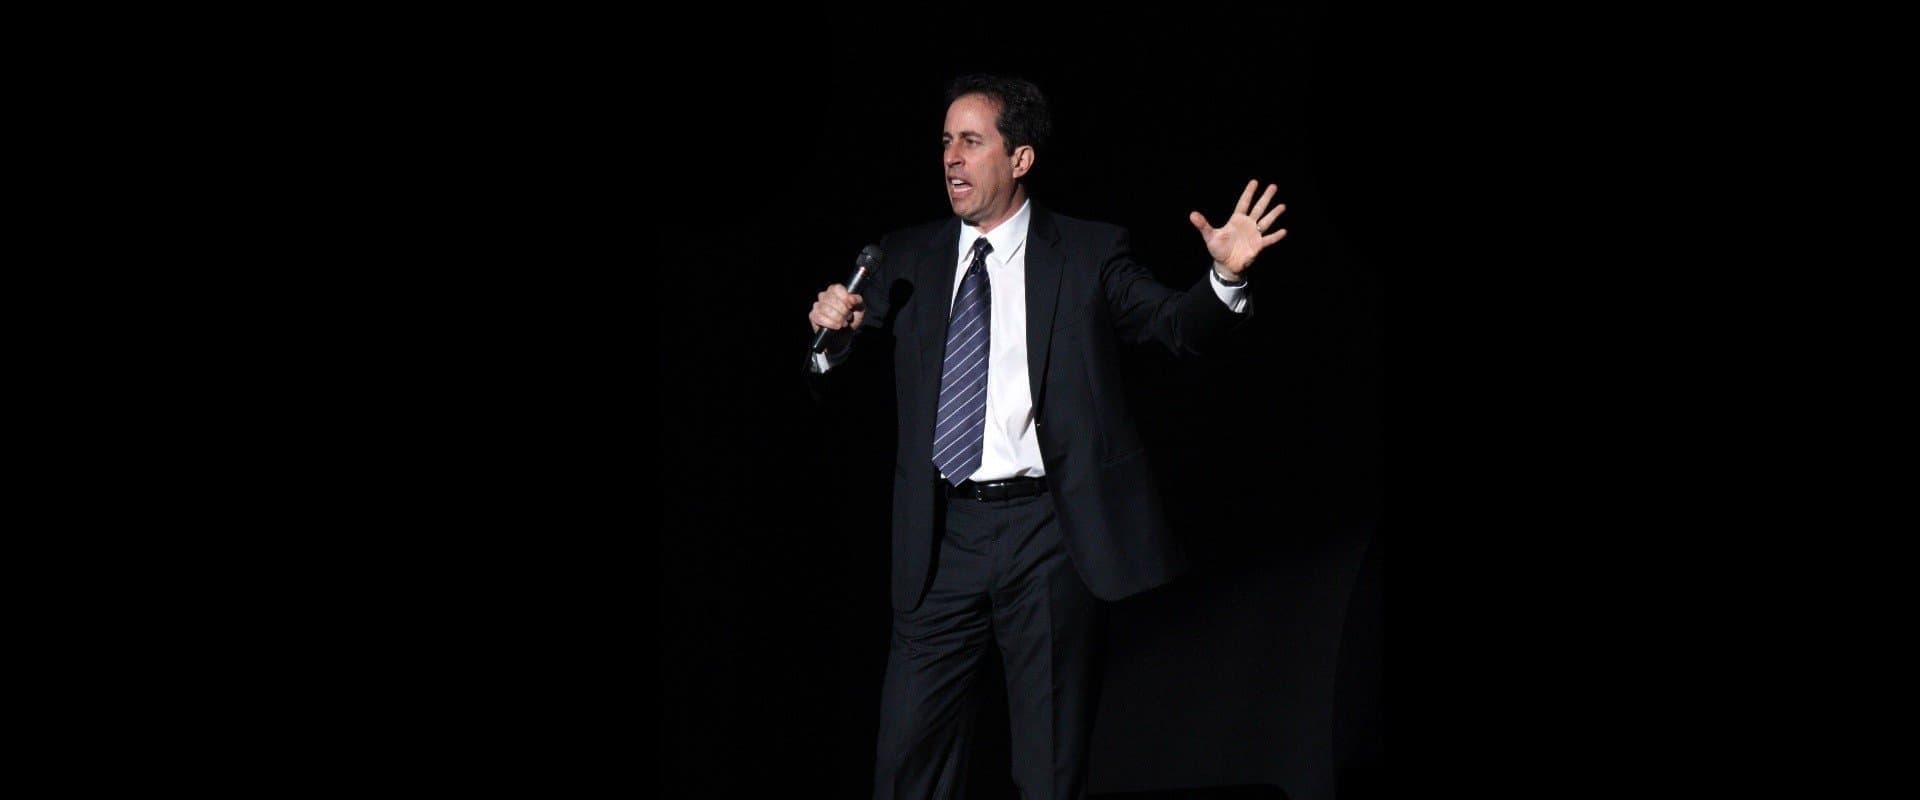 Jerry Seinfeld: I'm Telling You for the Last Time